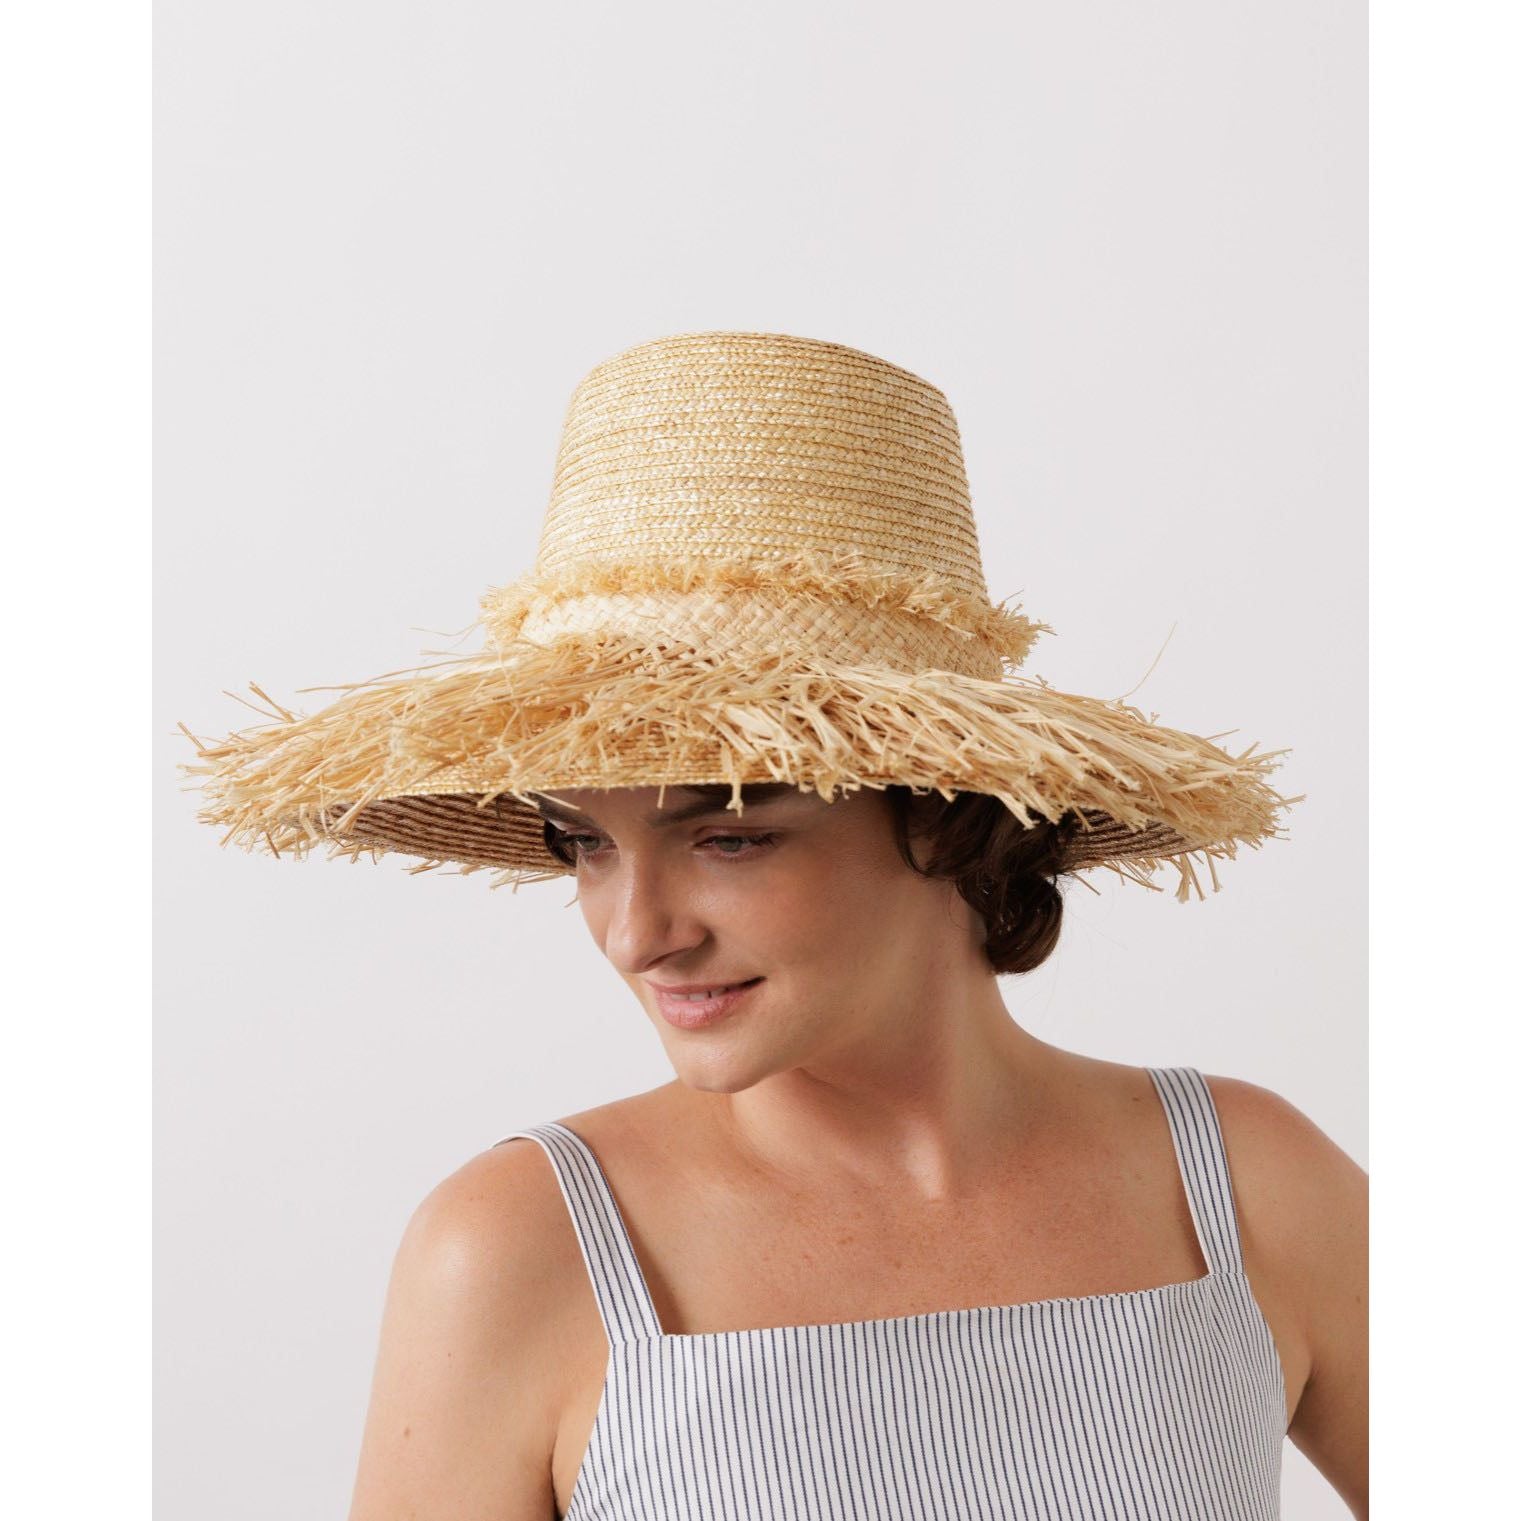 A woman wearing a Lola Hats Hula Skirt made of natural wheat straw with frayed edges, dressed in a striped outfit, looks downward with a subtle smile.